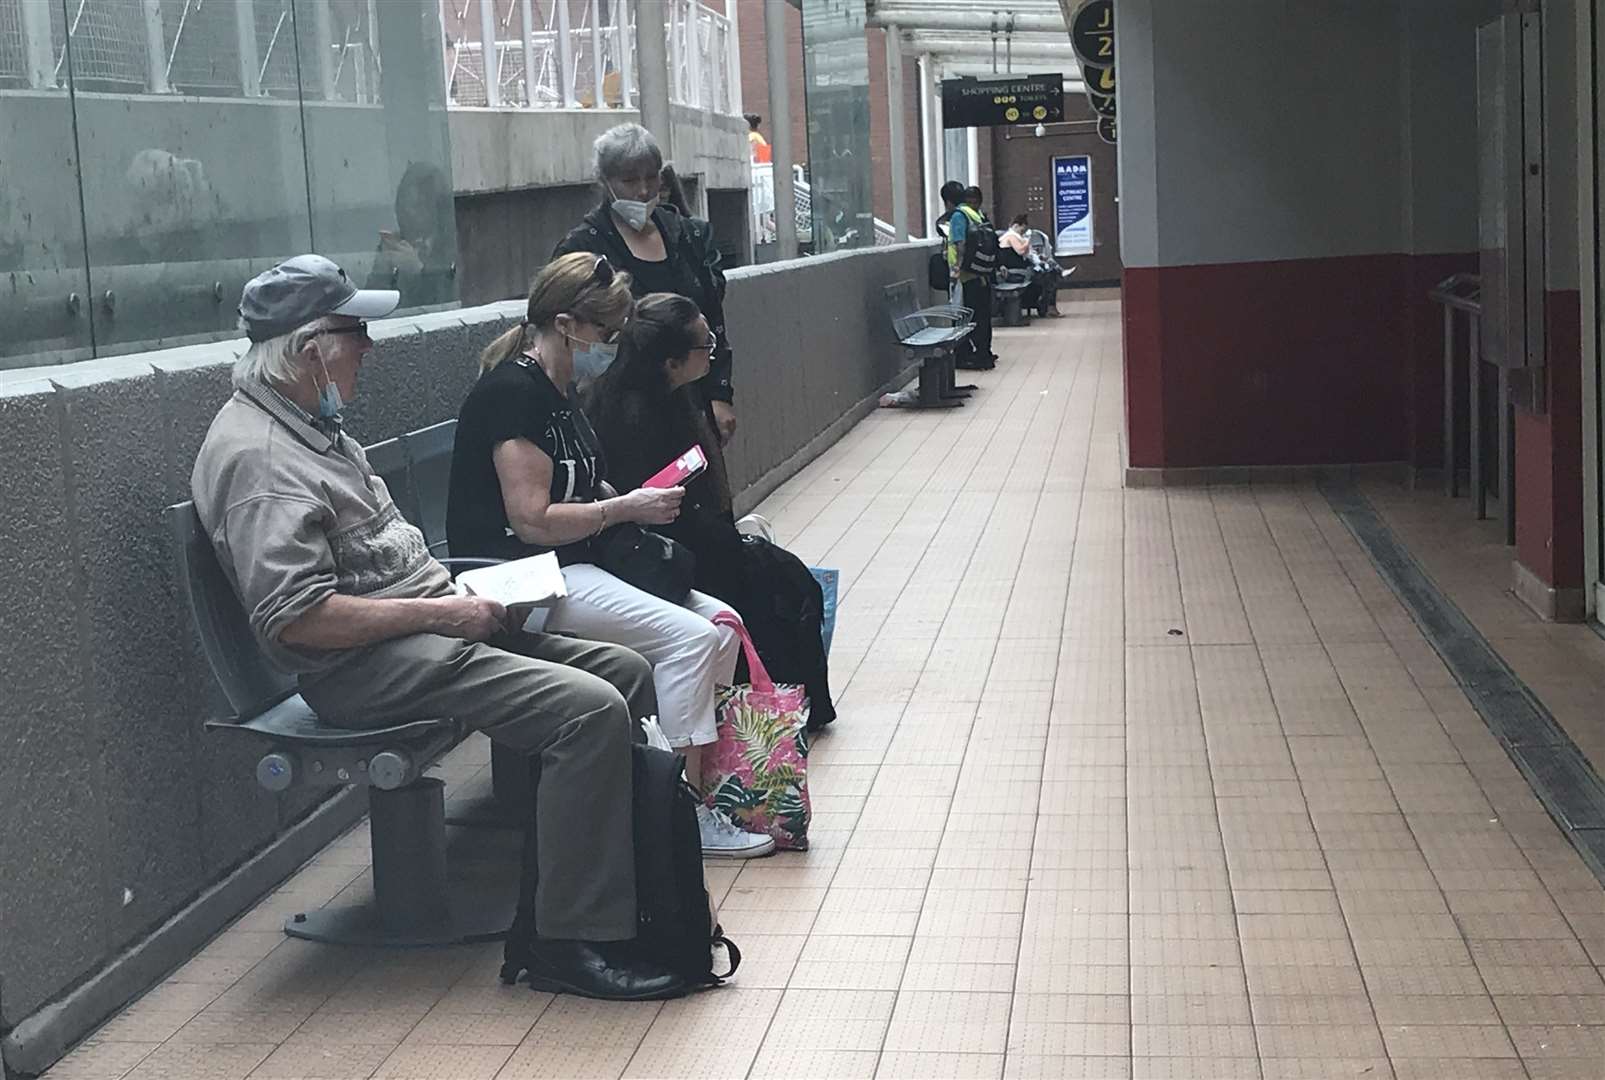 Bus passengers wearing face coverings in Maidstone today